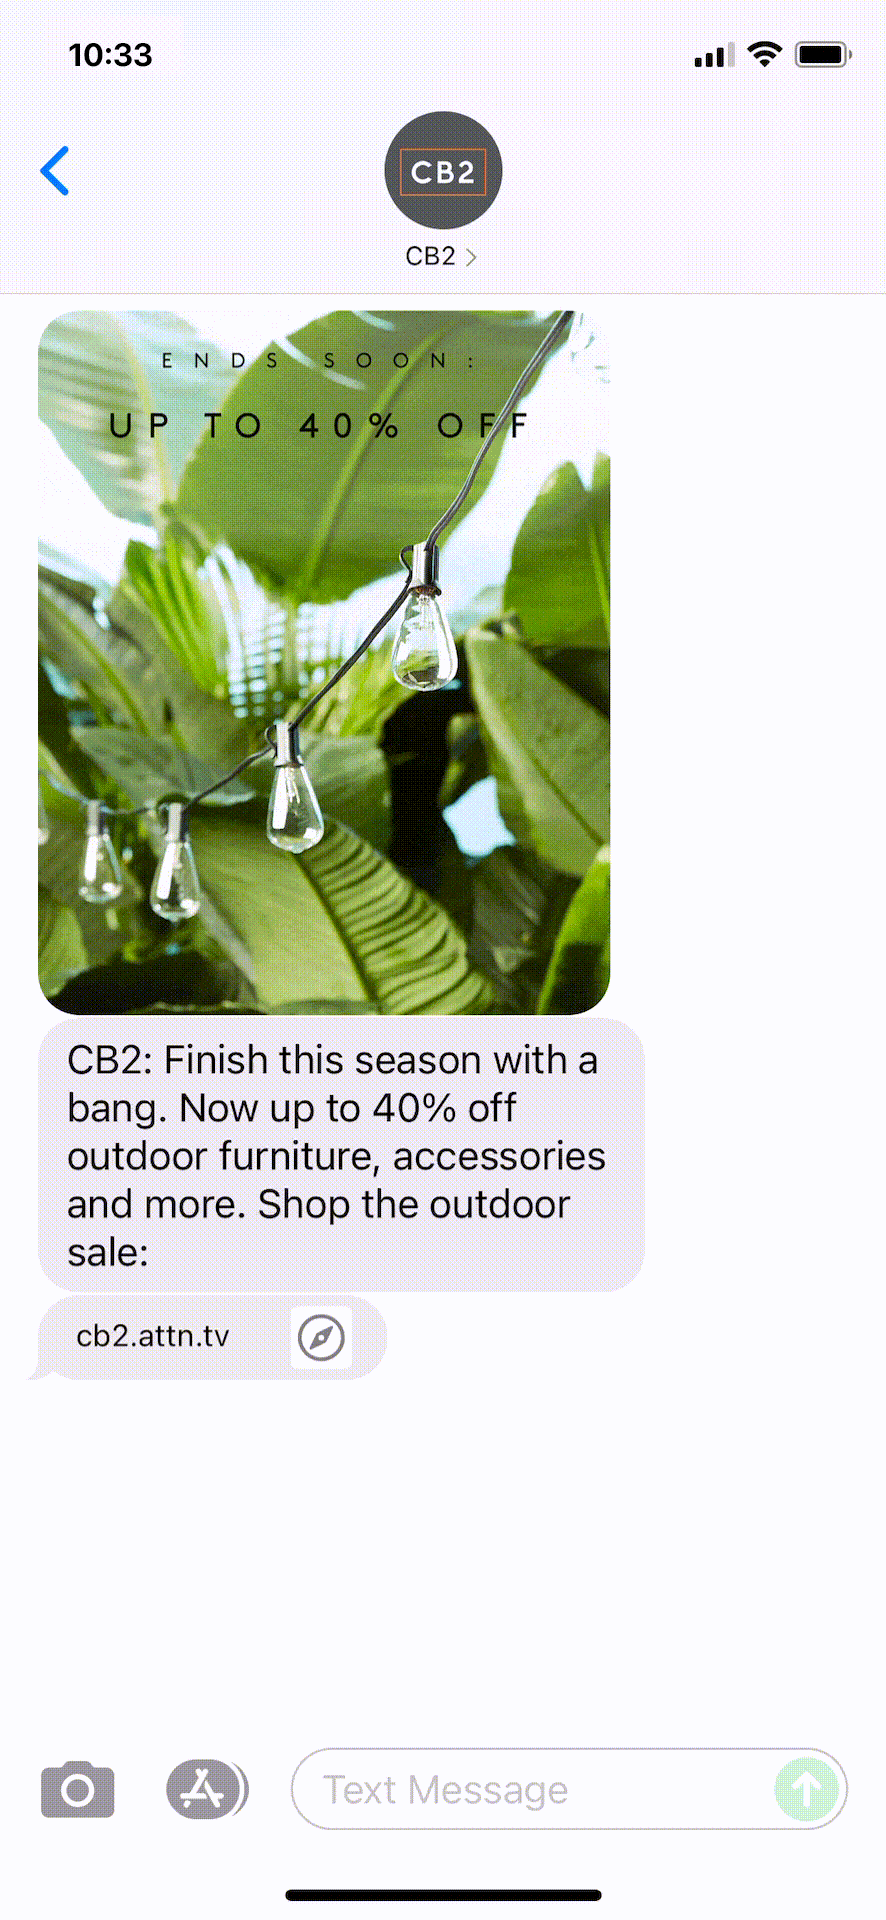 CB2-Text-Message-Marketing-Example-07.17.2021